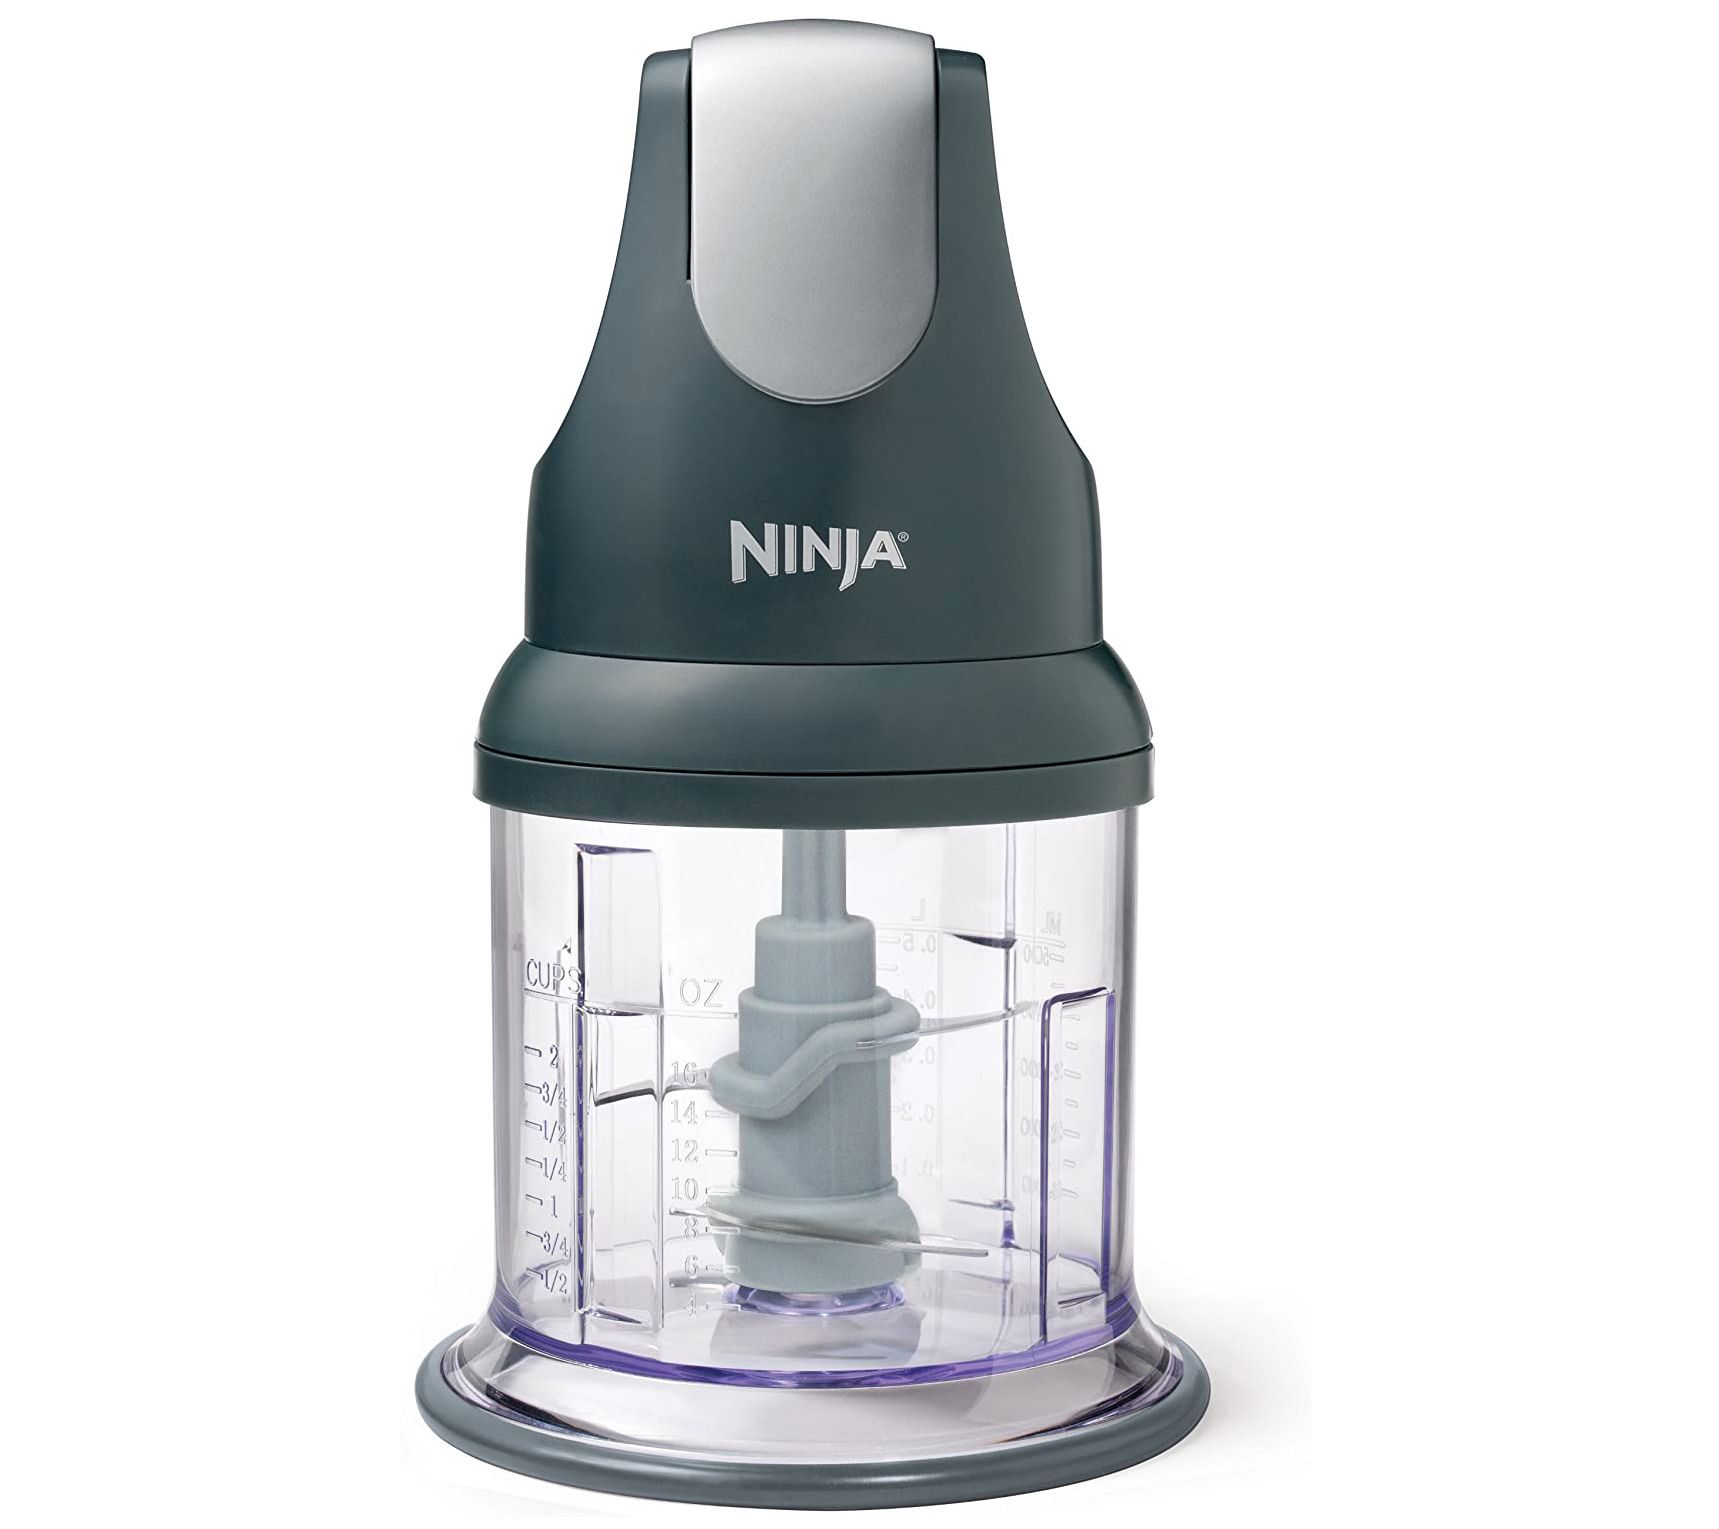 Ninja chopper • Compare (6 products) see prices »